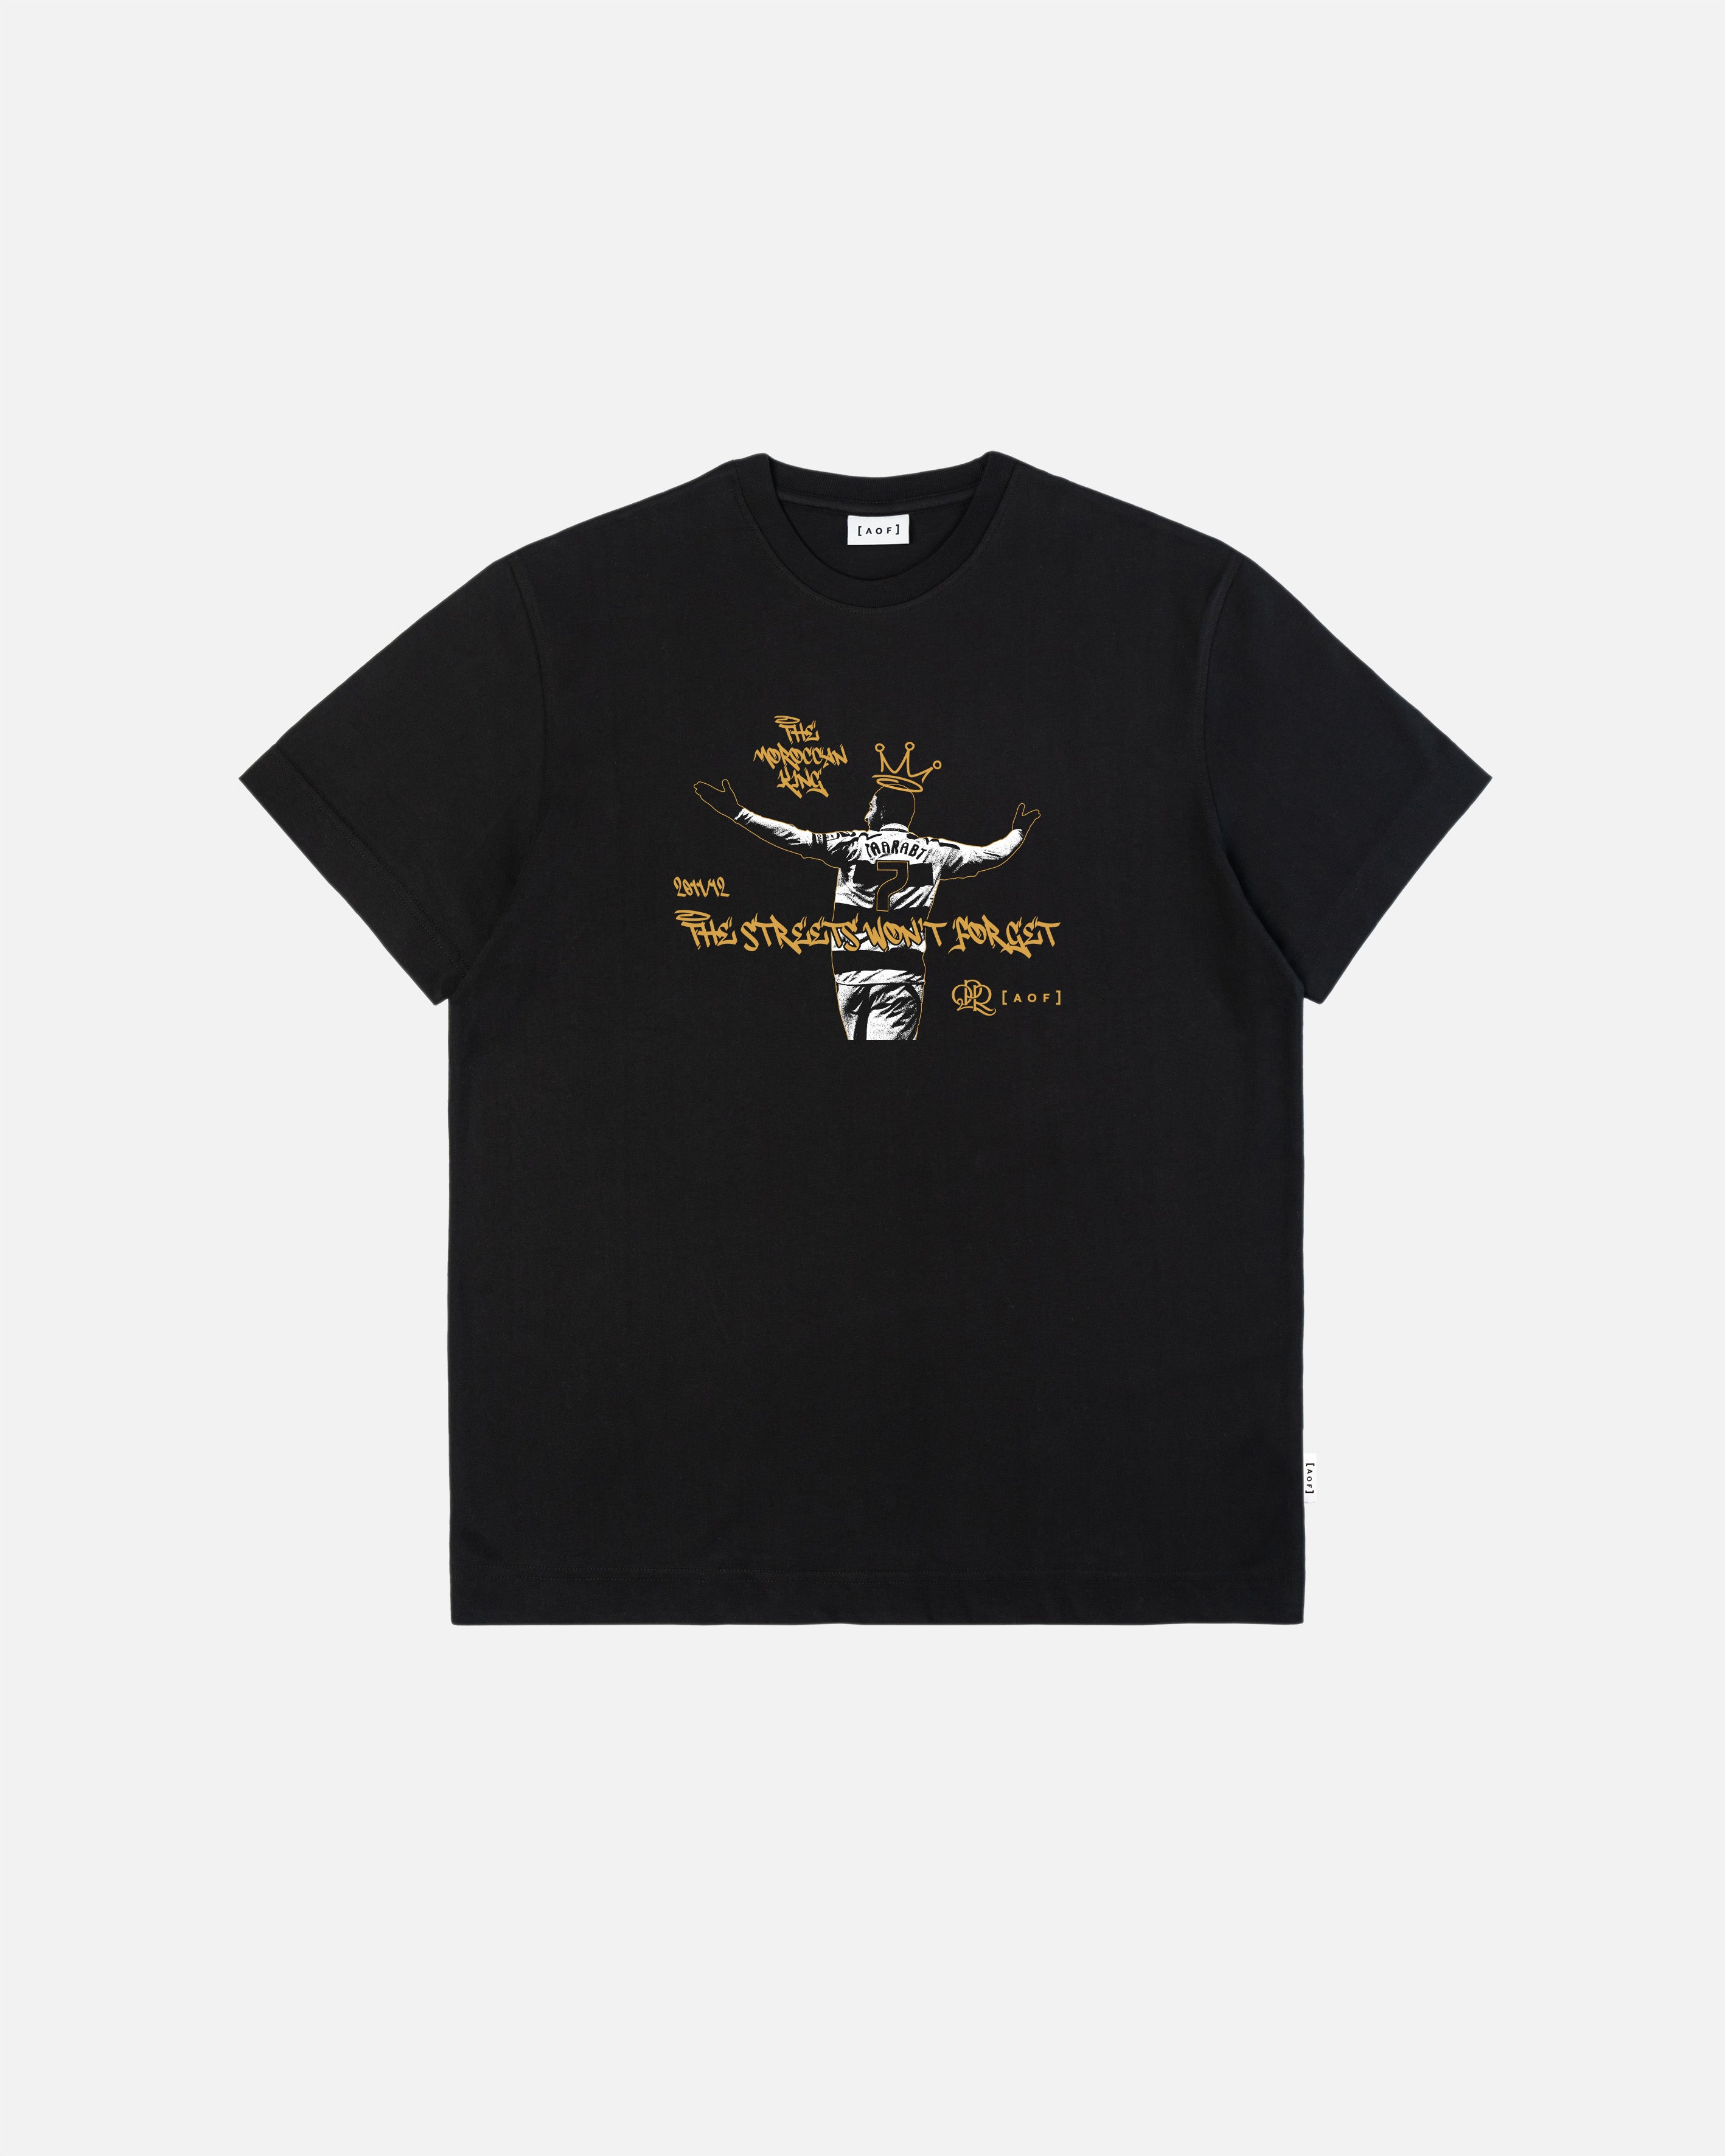 AOF x QPR Streets Won't Forget - Tee